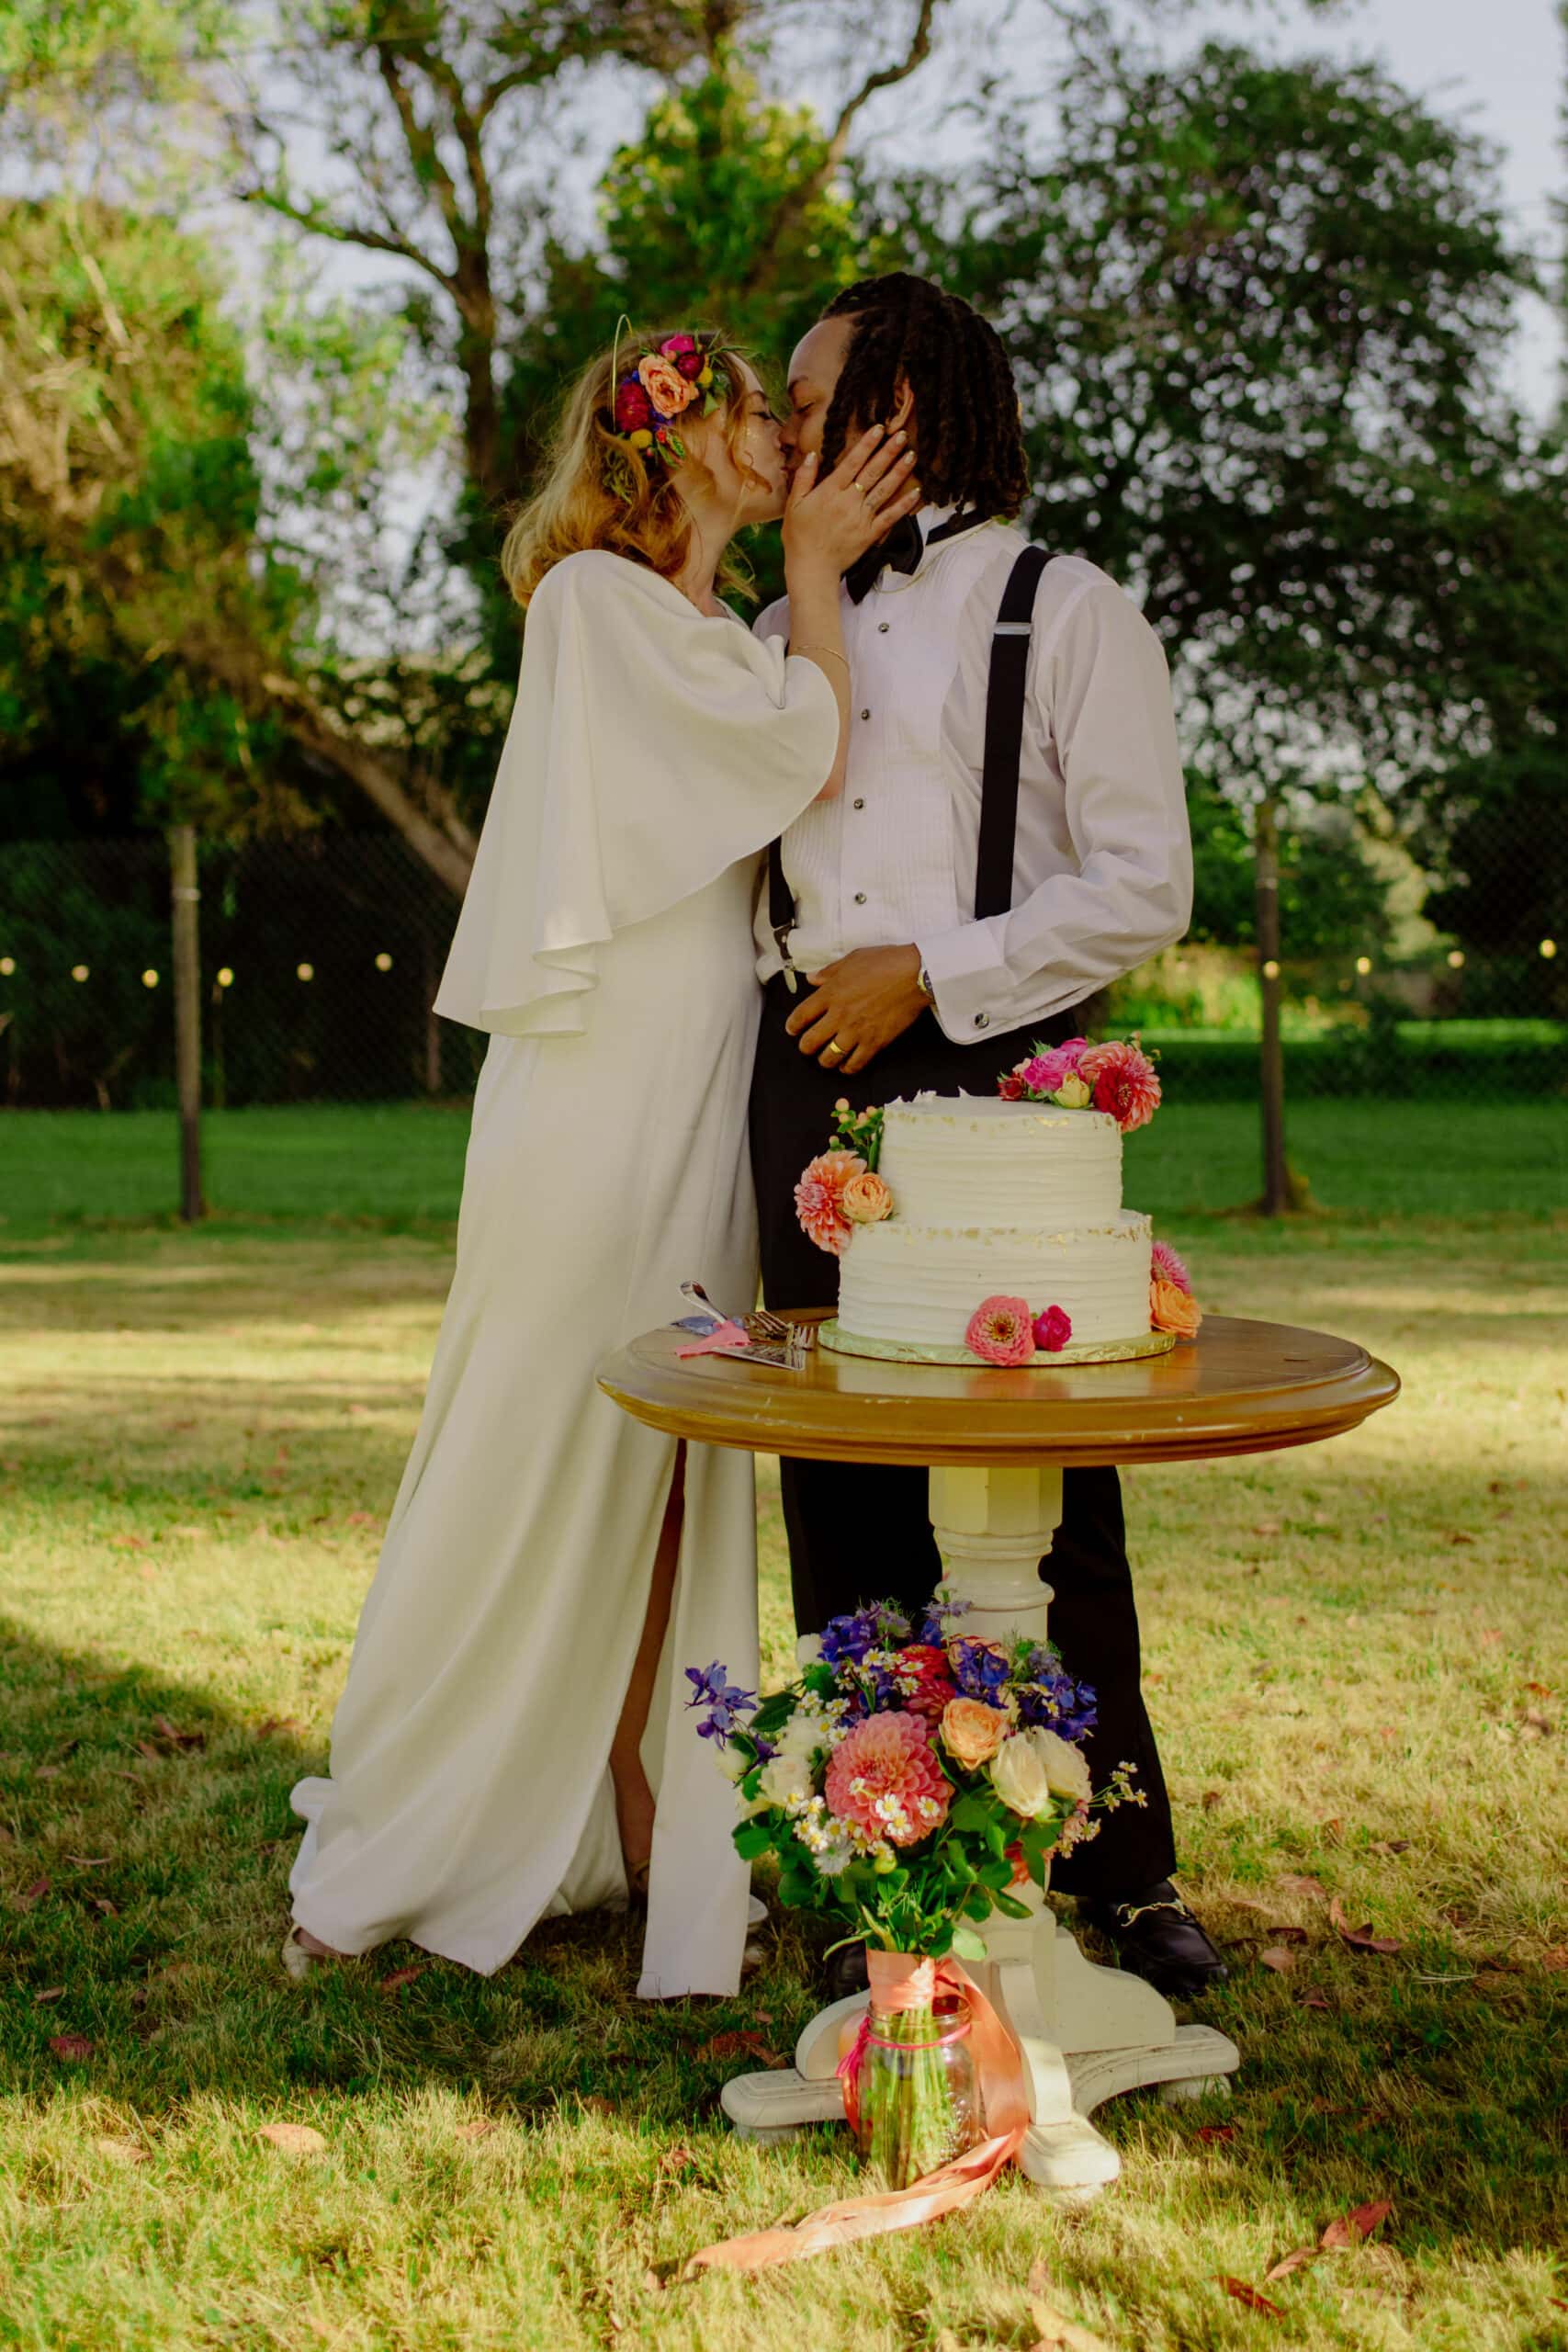 Bride and groom kiss during cake cutting in Northern California garden